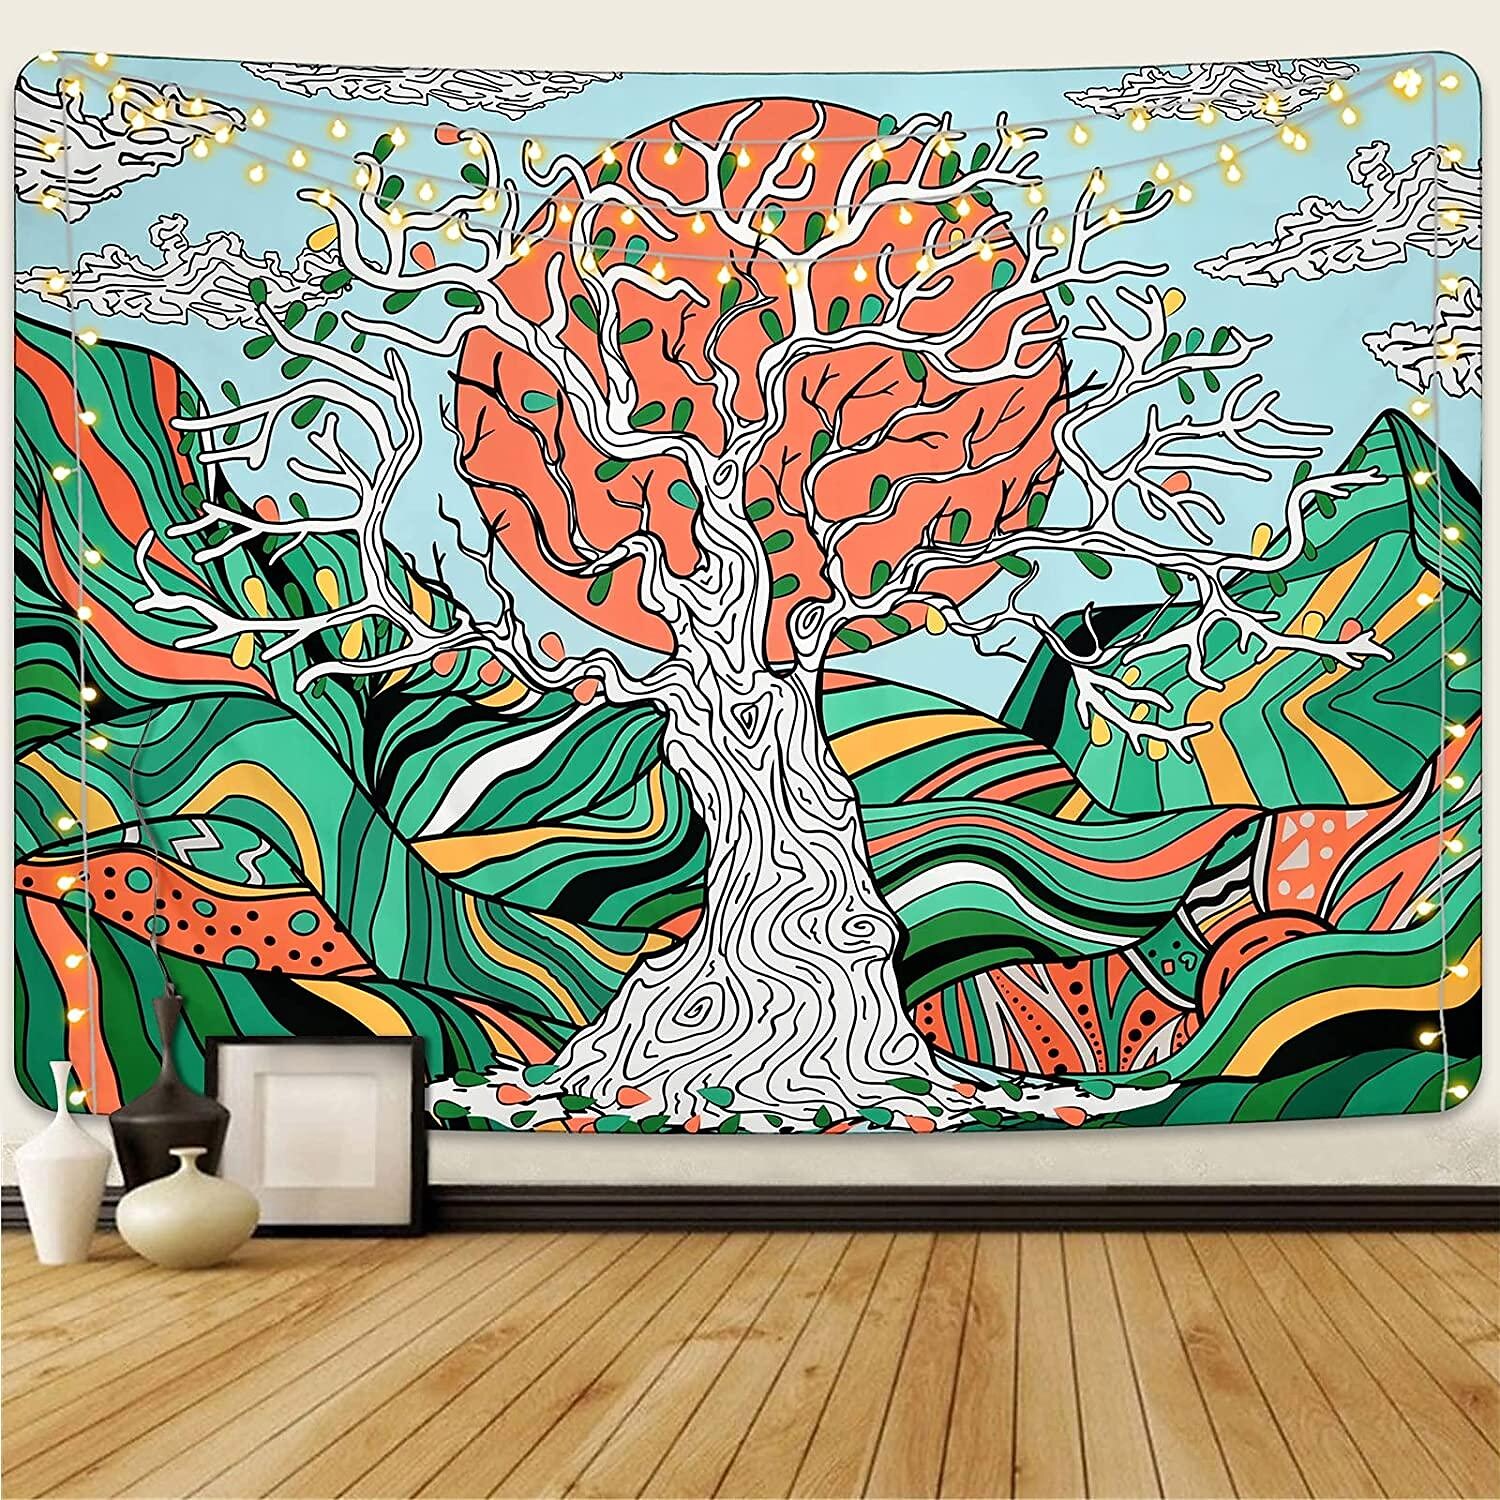 Painting Style Large Wall Tapestry Tree of Life Art Decor